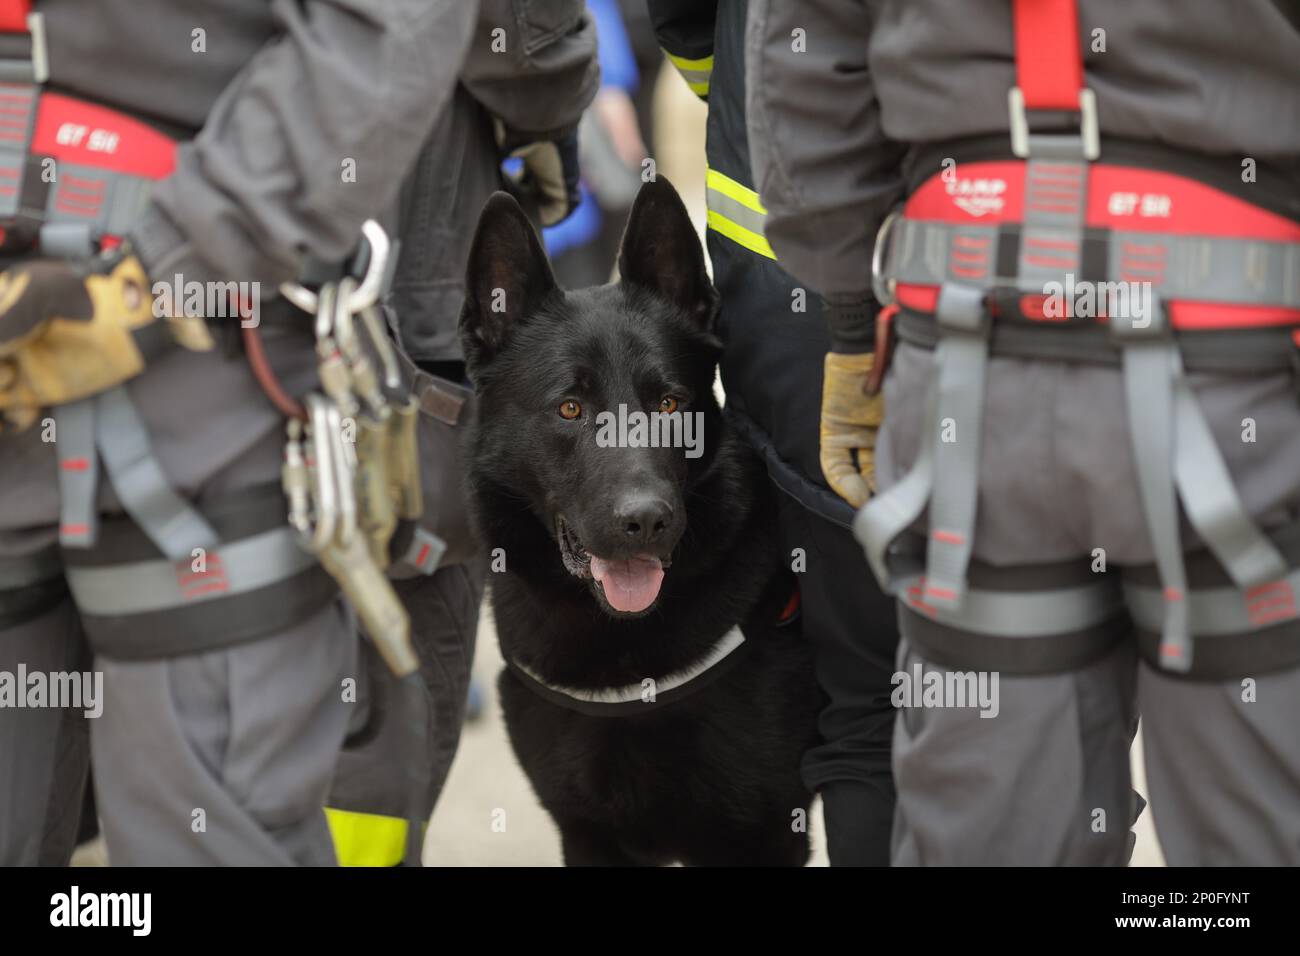 Ciolpani, Romania - March 1, 2023: Rescue service dog trained to detect victims of earthquakes and other disasters near his trainer. Stock Photo